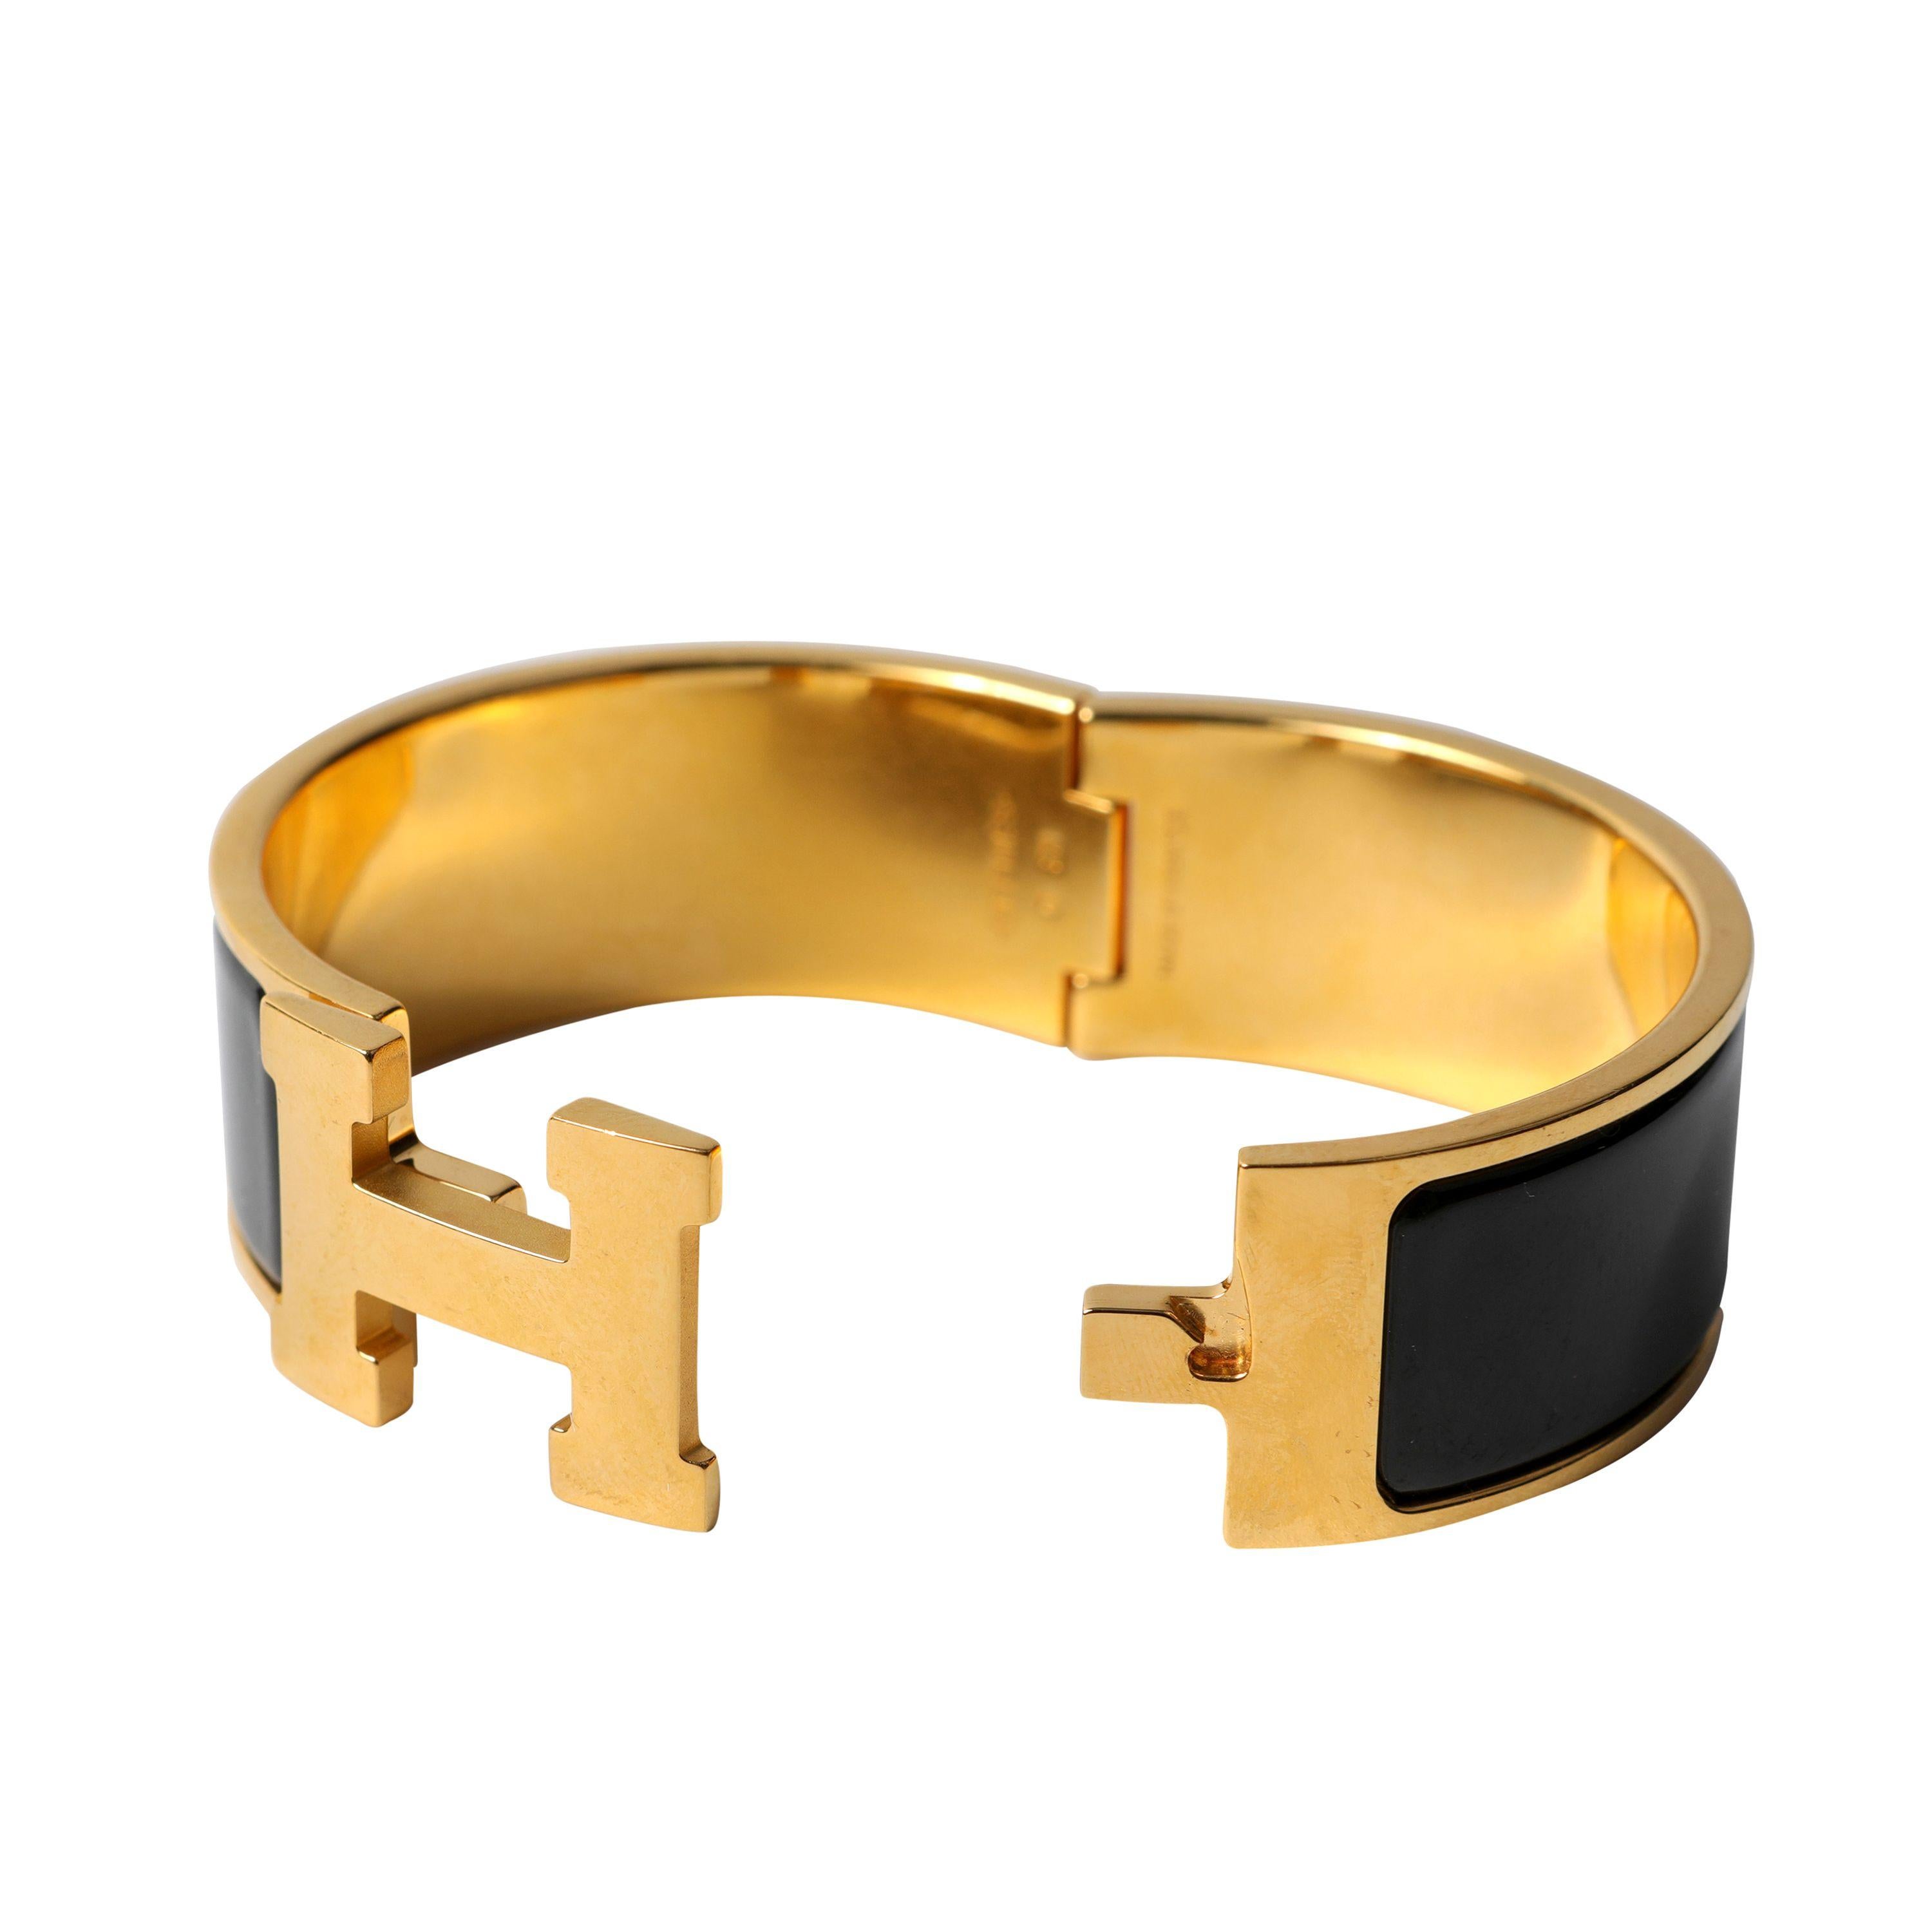 This authentic Hermès Black Wide Clic Clac Bracelet is in pristine condition.  Gold hardware with H swivel hinge.  Made in France.  Pouch or box included.

PBF 13645